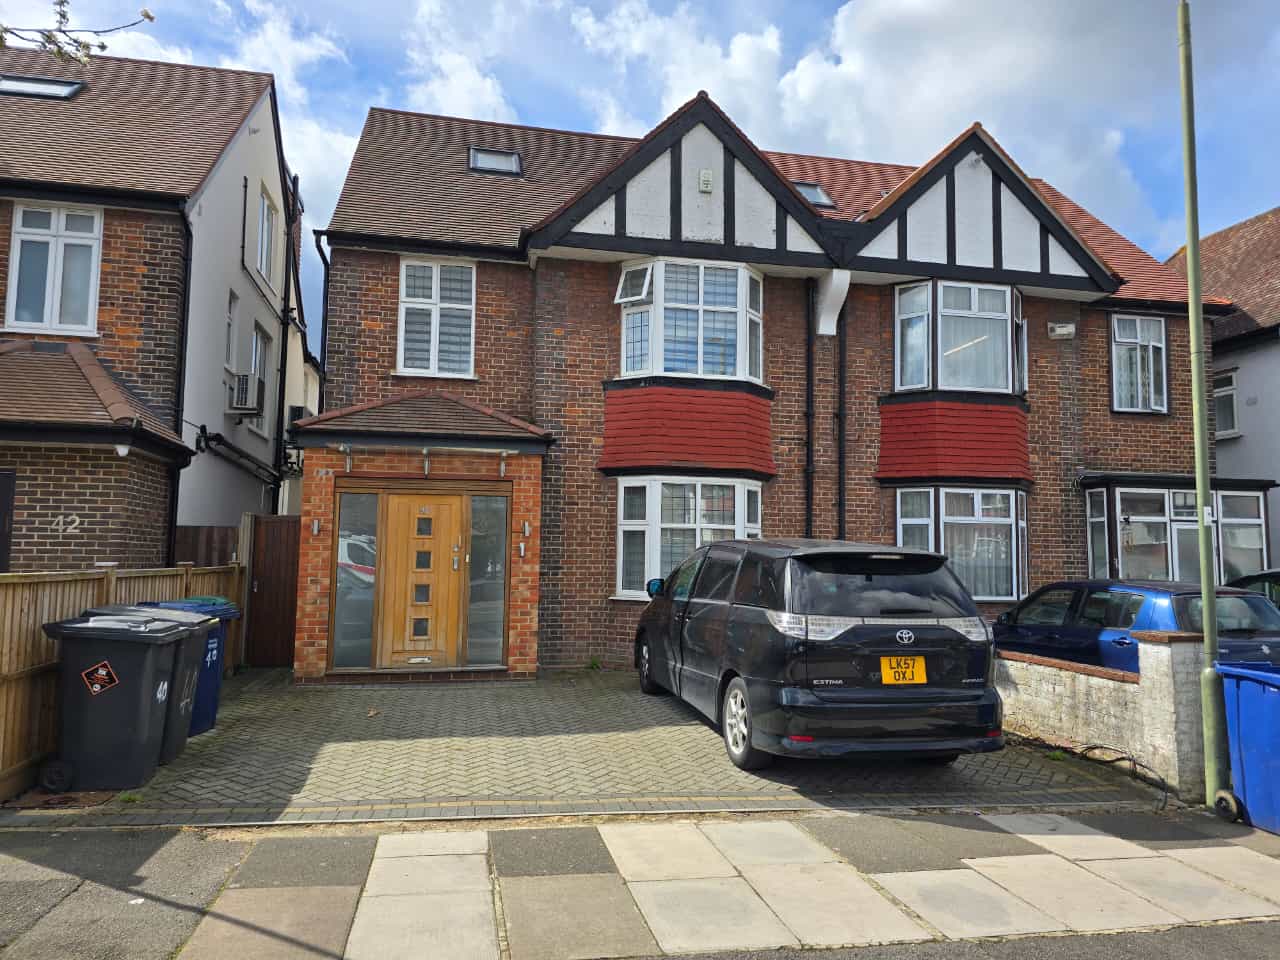 6 bed Semi-Detached House for rent in Hendon. From ELI-G Estates ltd